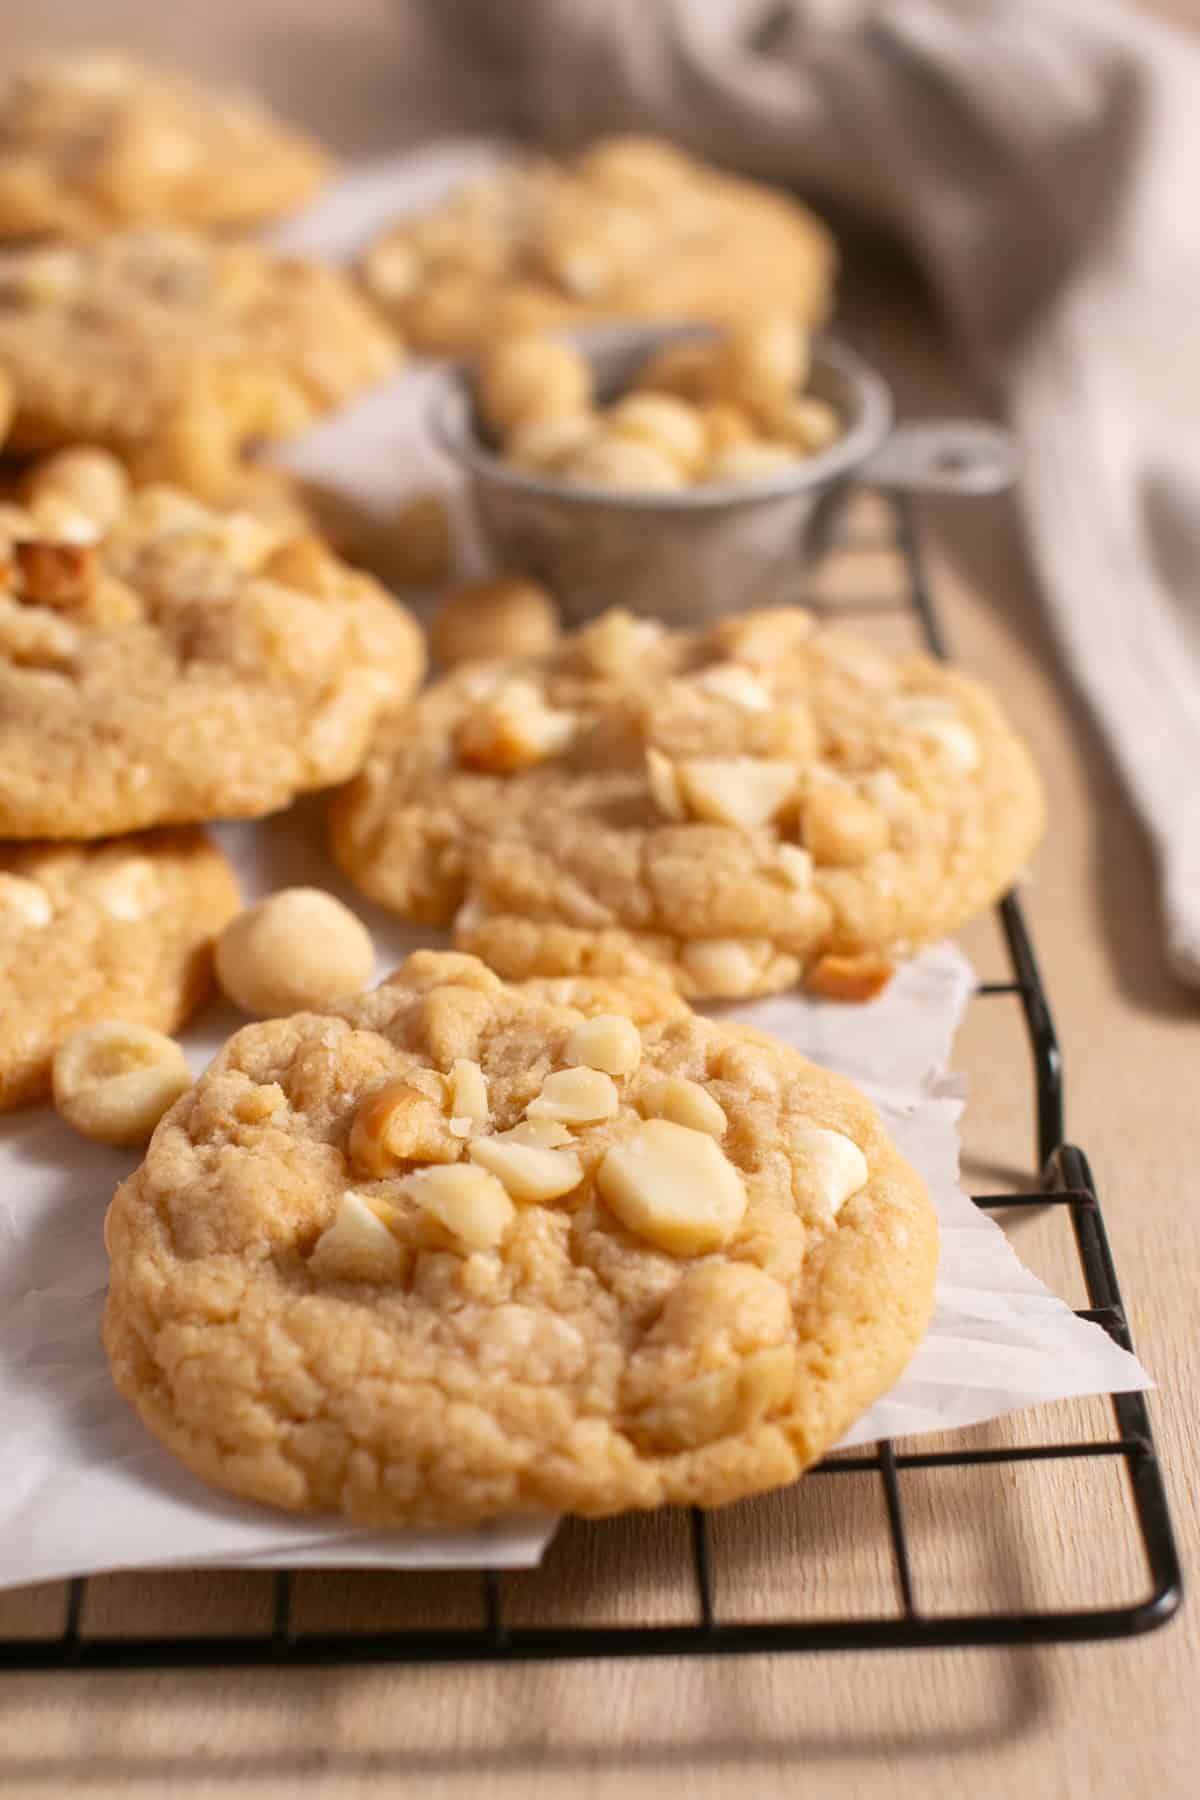 White Chocolate Macadamia Nut Cookies on a cooling rack with other cookies.